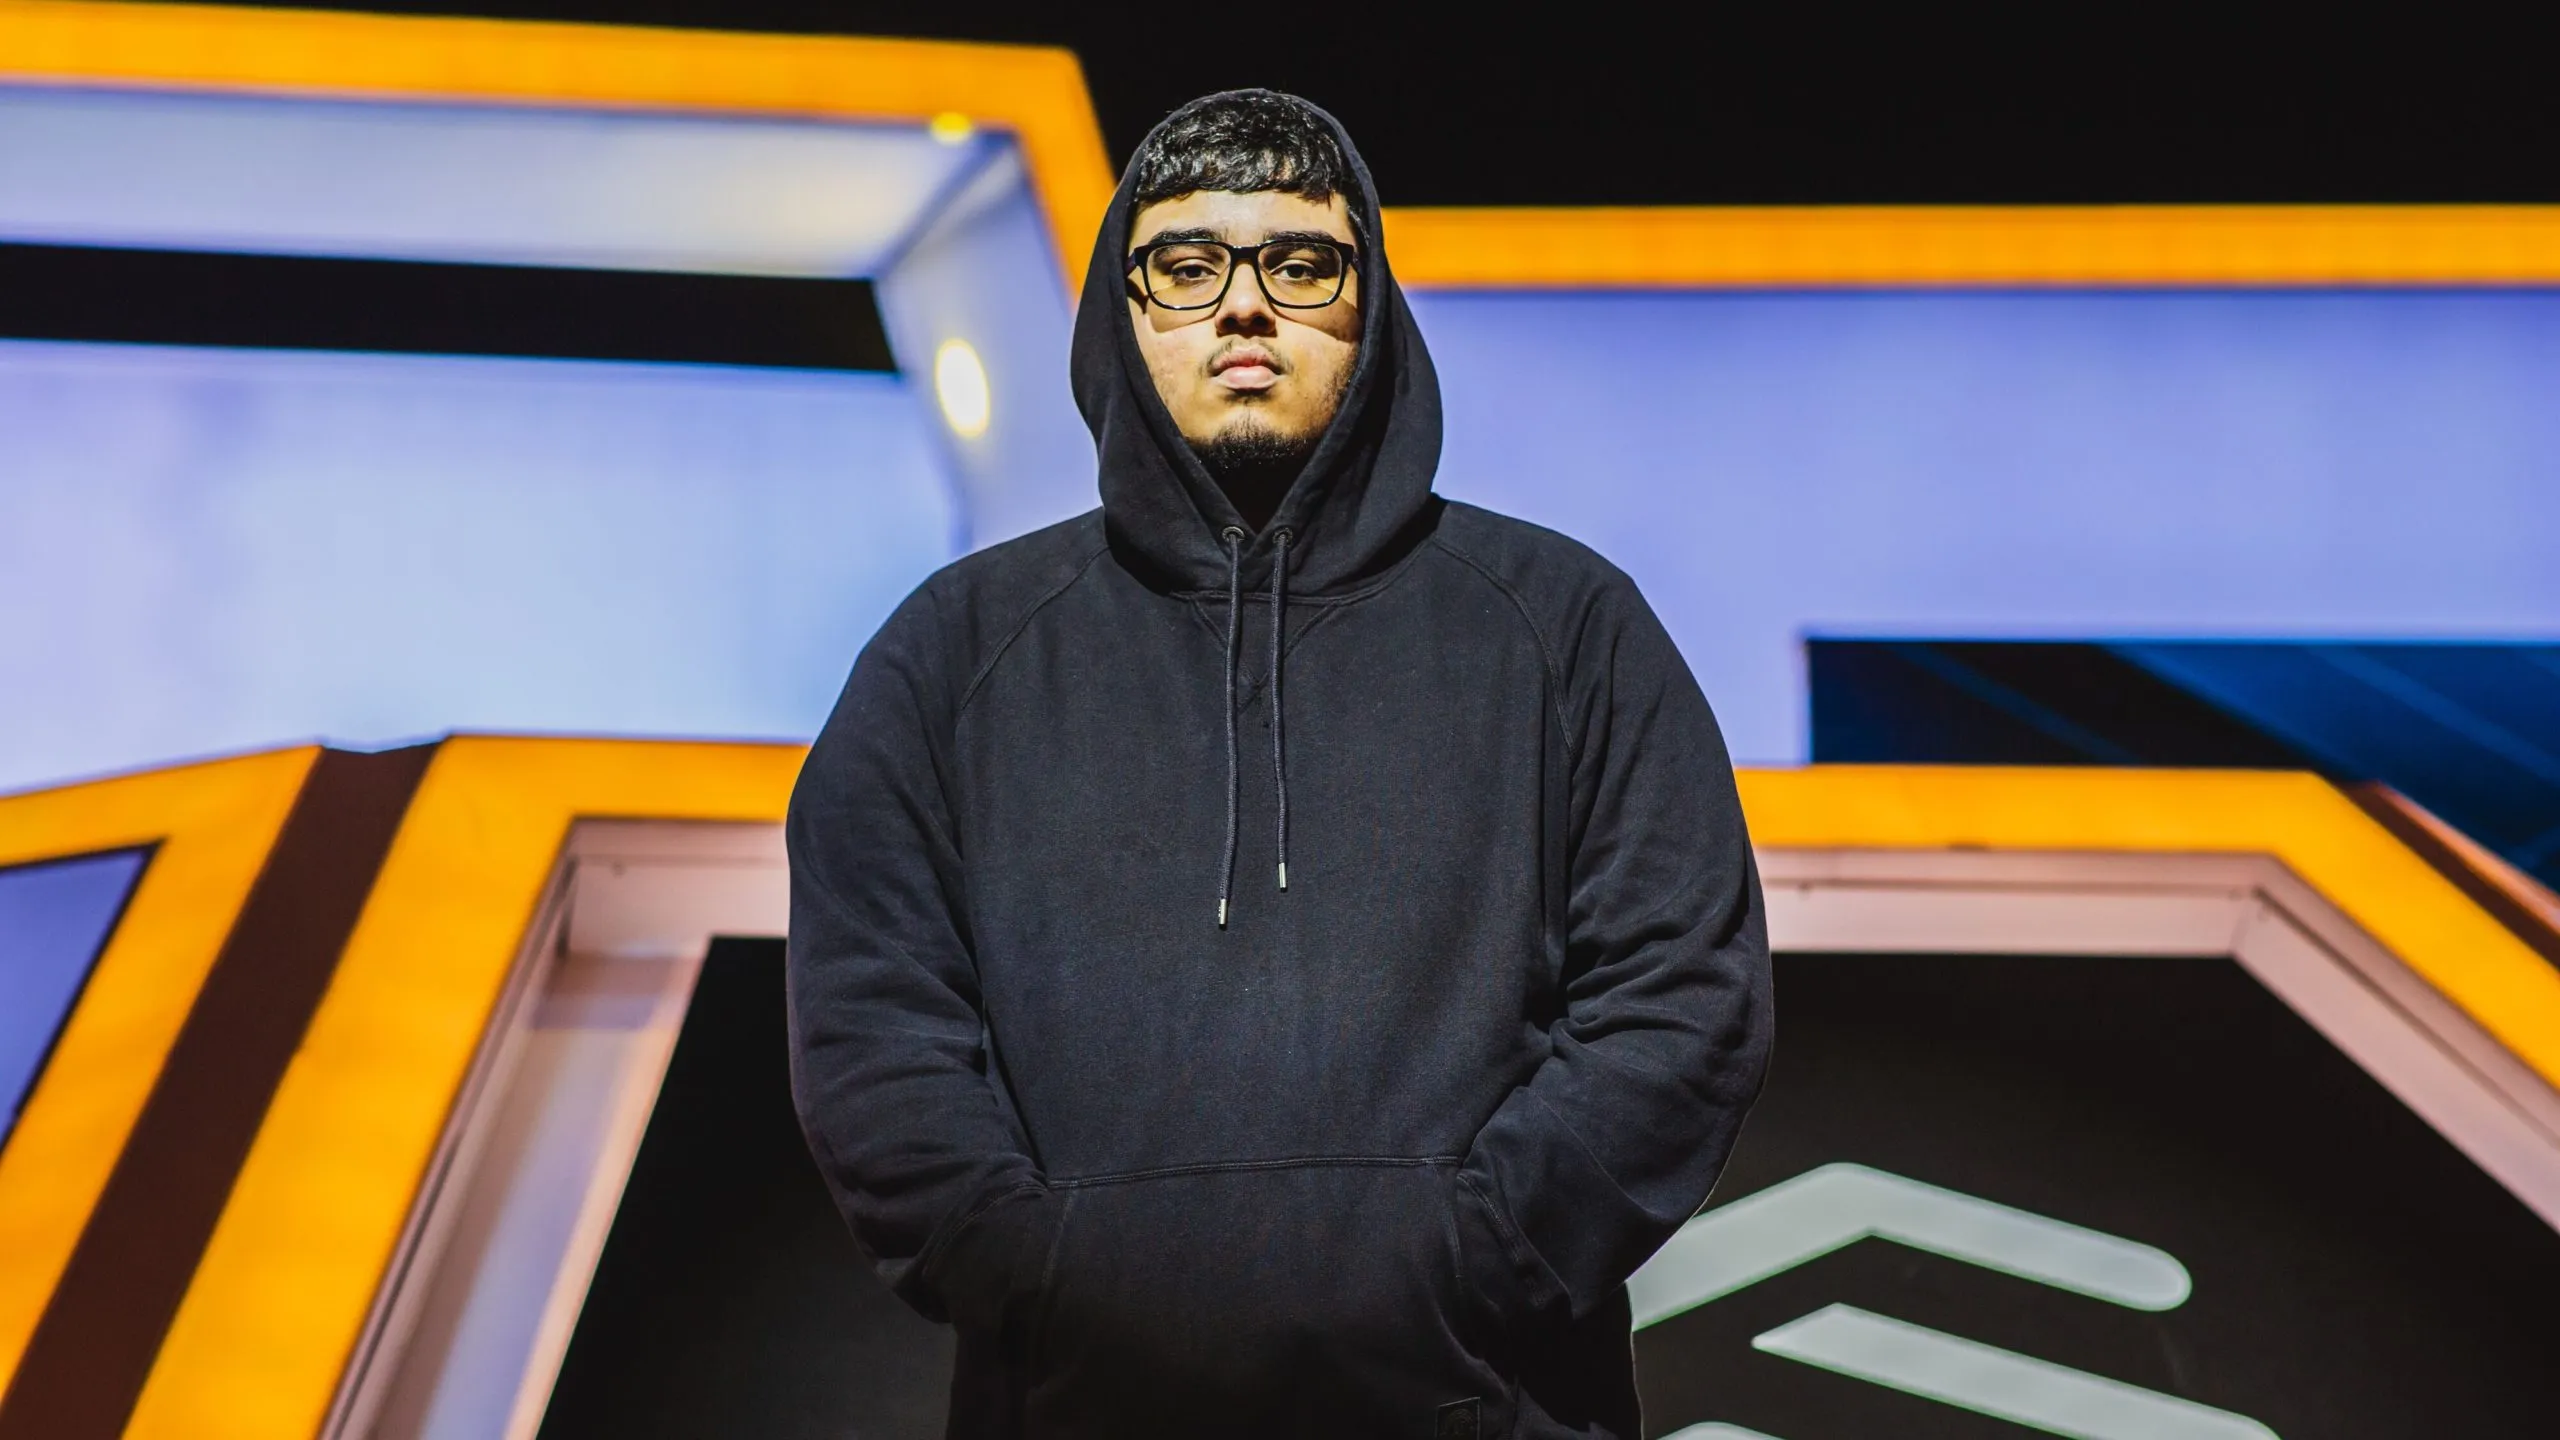 OpTic Texas reunites 2020 CDL world champs with roster change